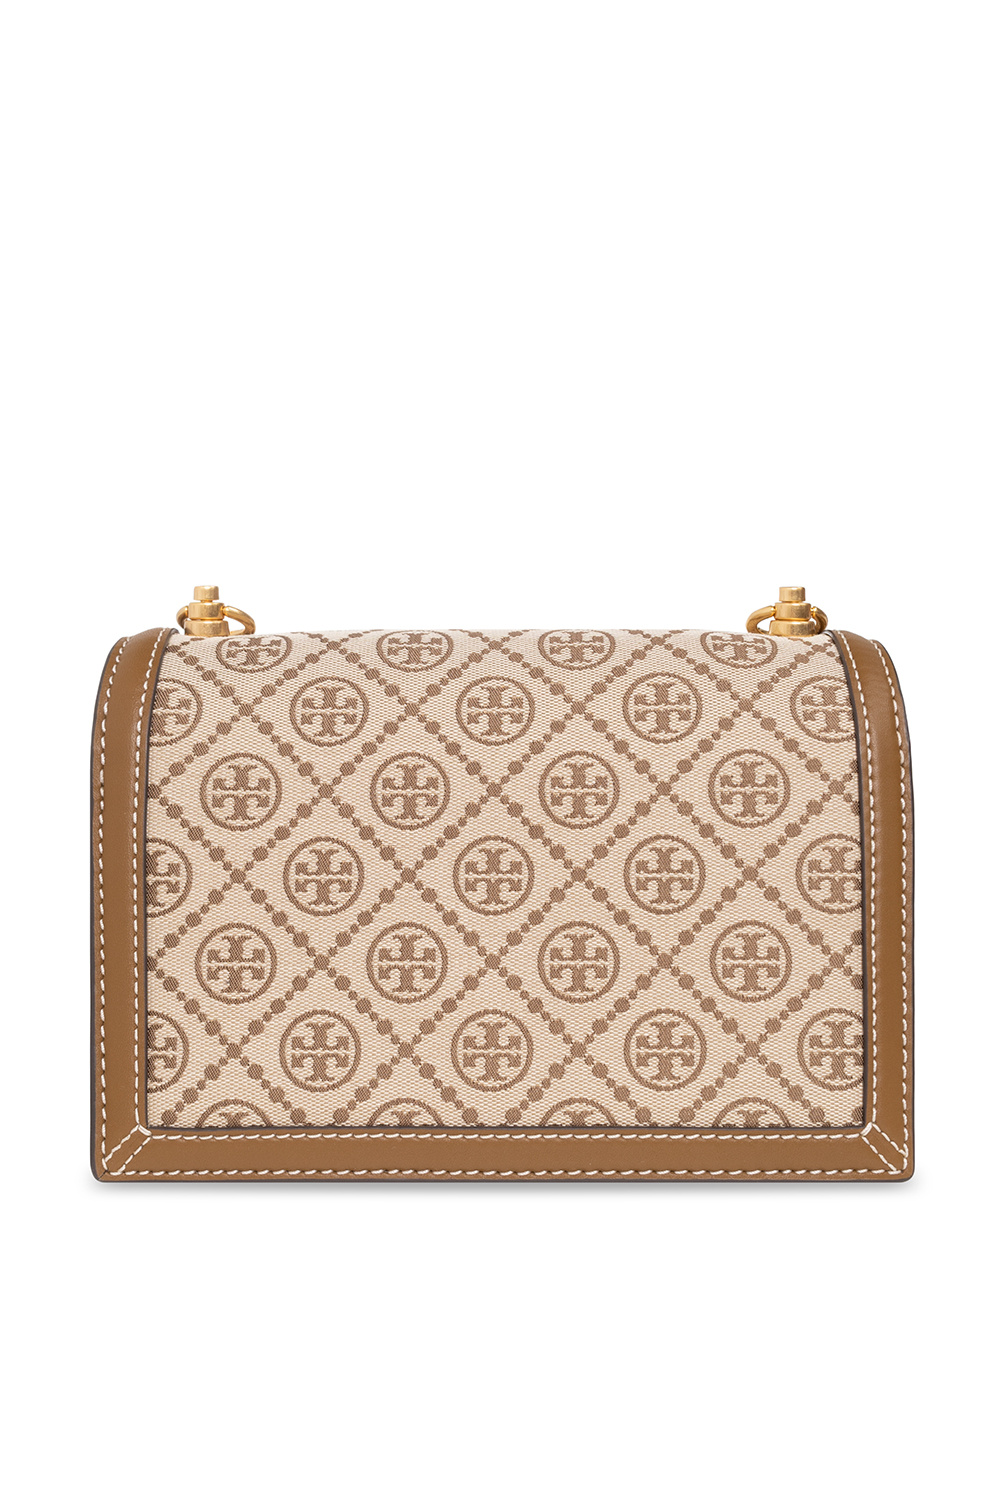 Tory Burch 'the T Monogram Small' Shoulder Bag in Blue